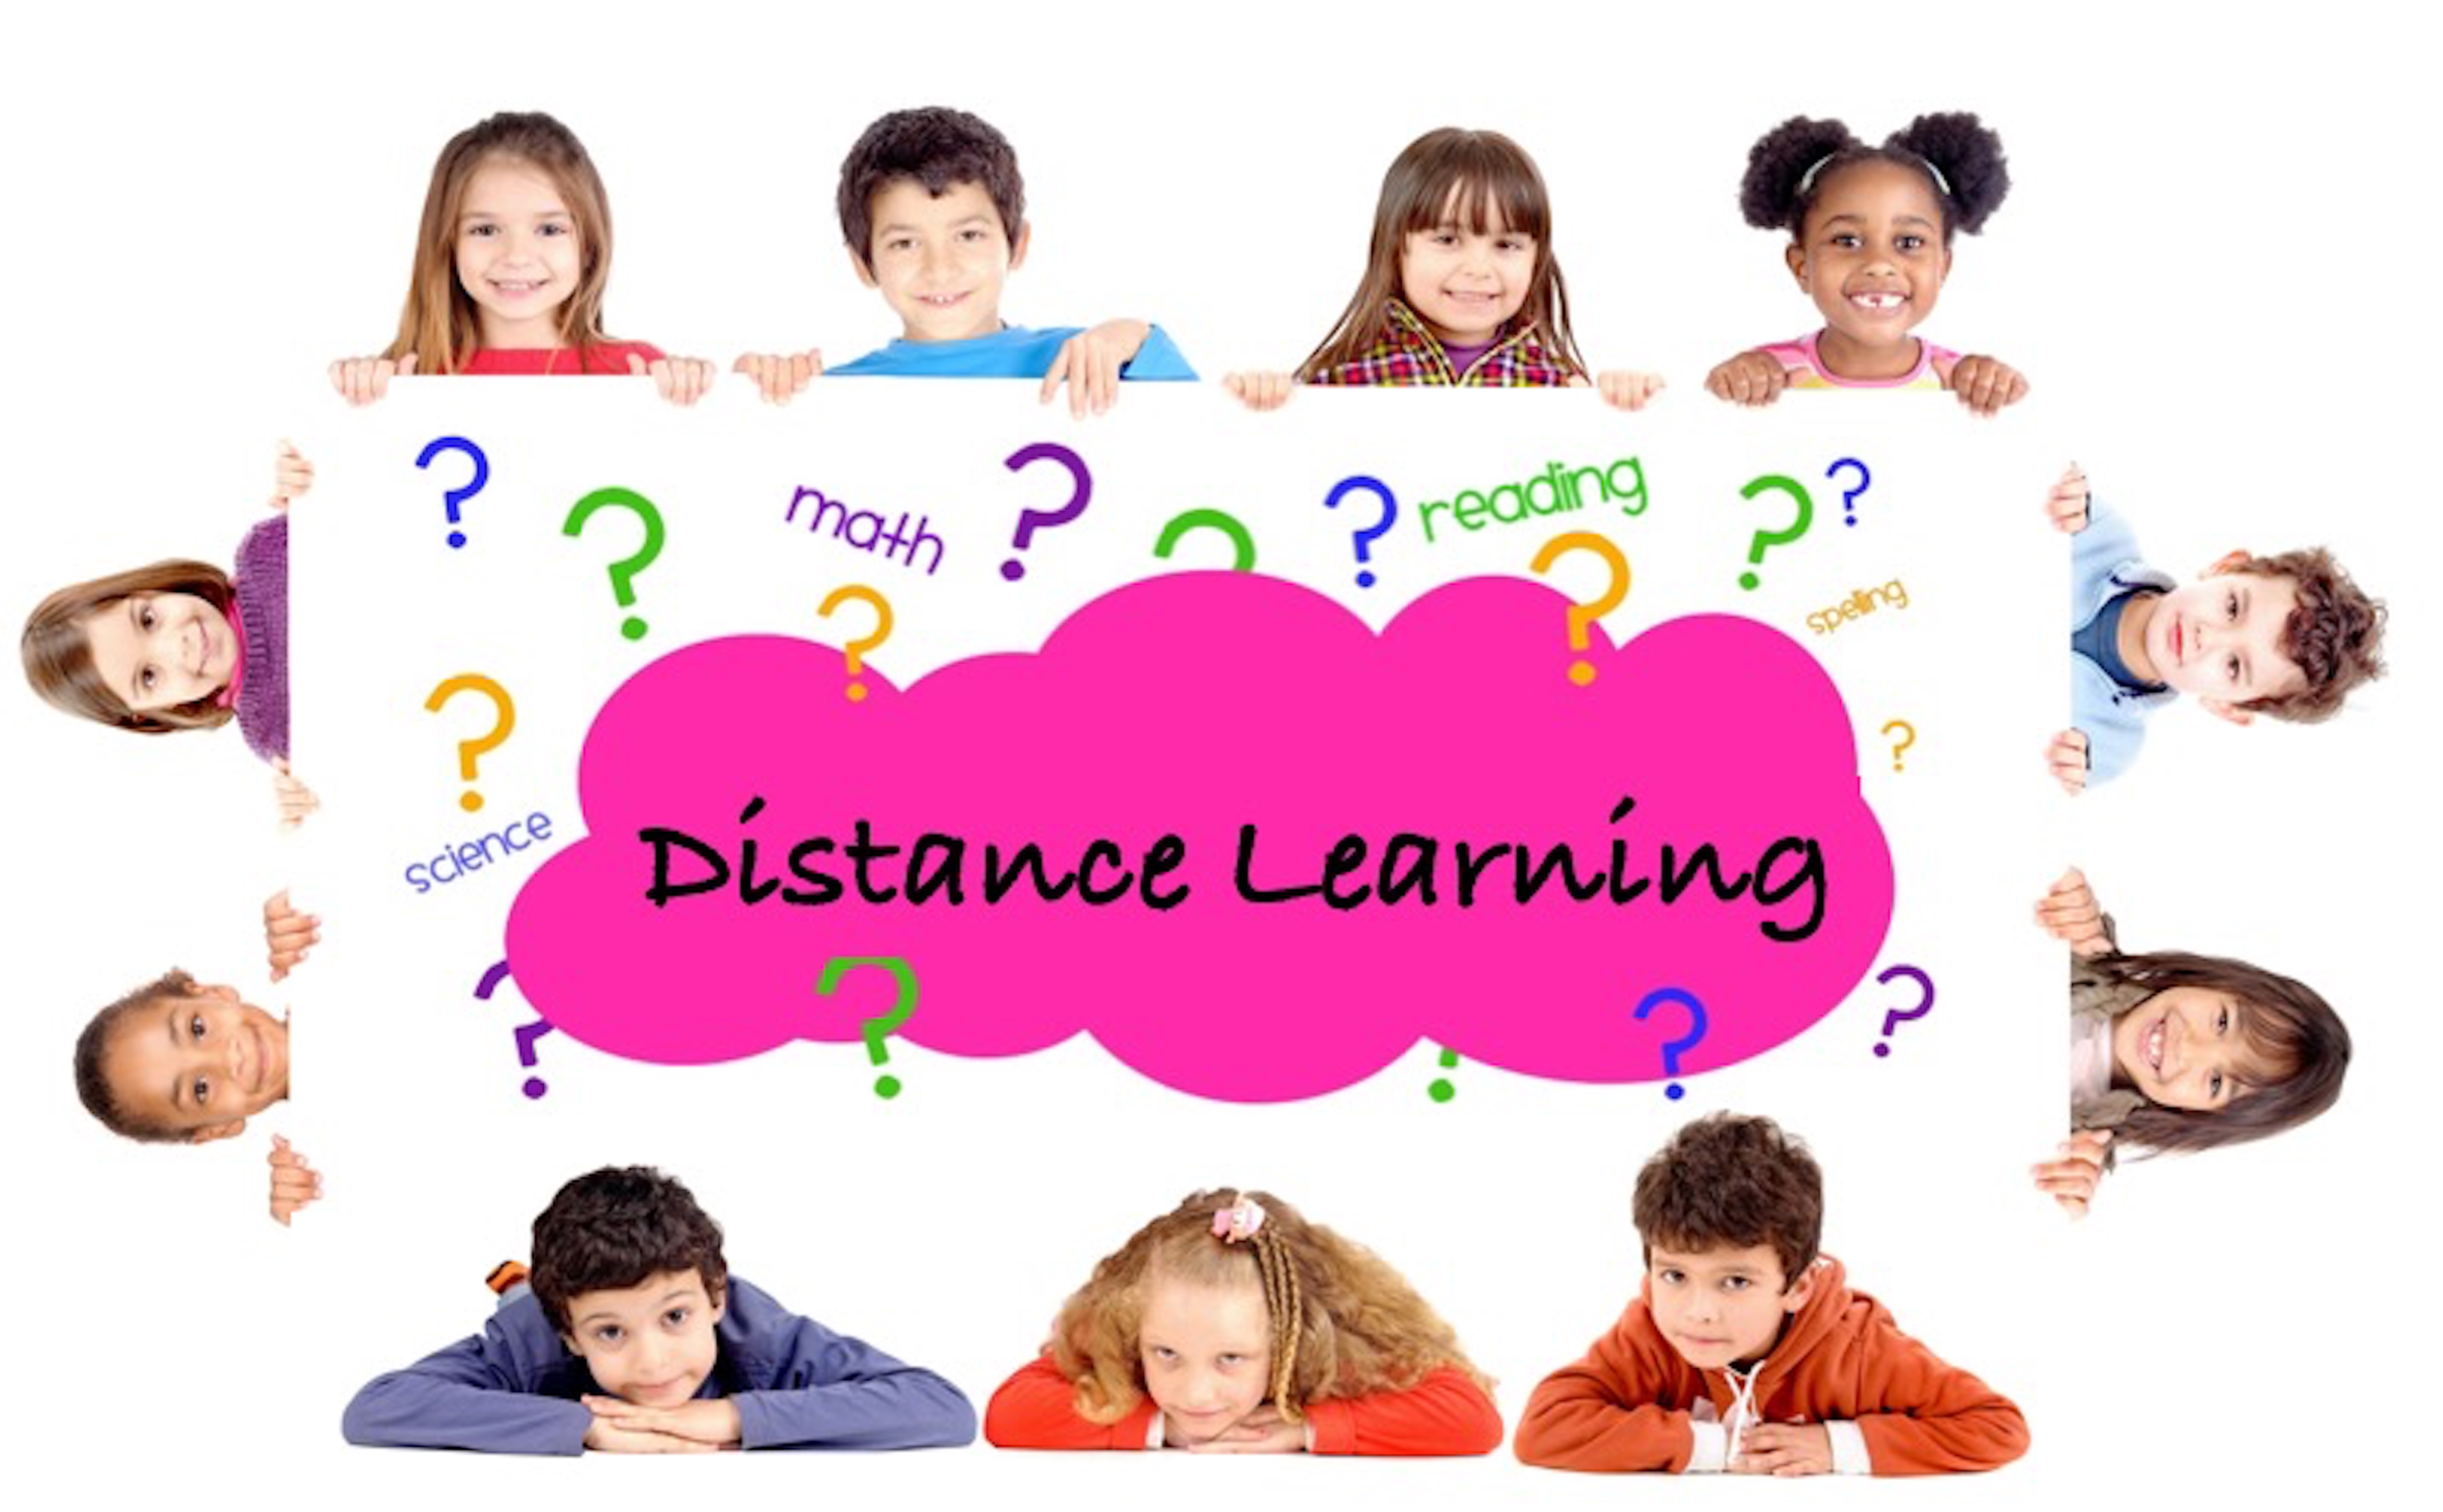 children holding sign that says distance learning